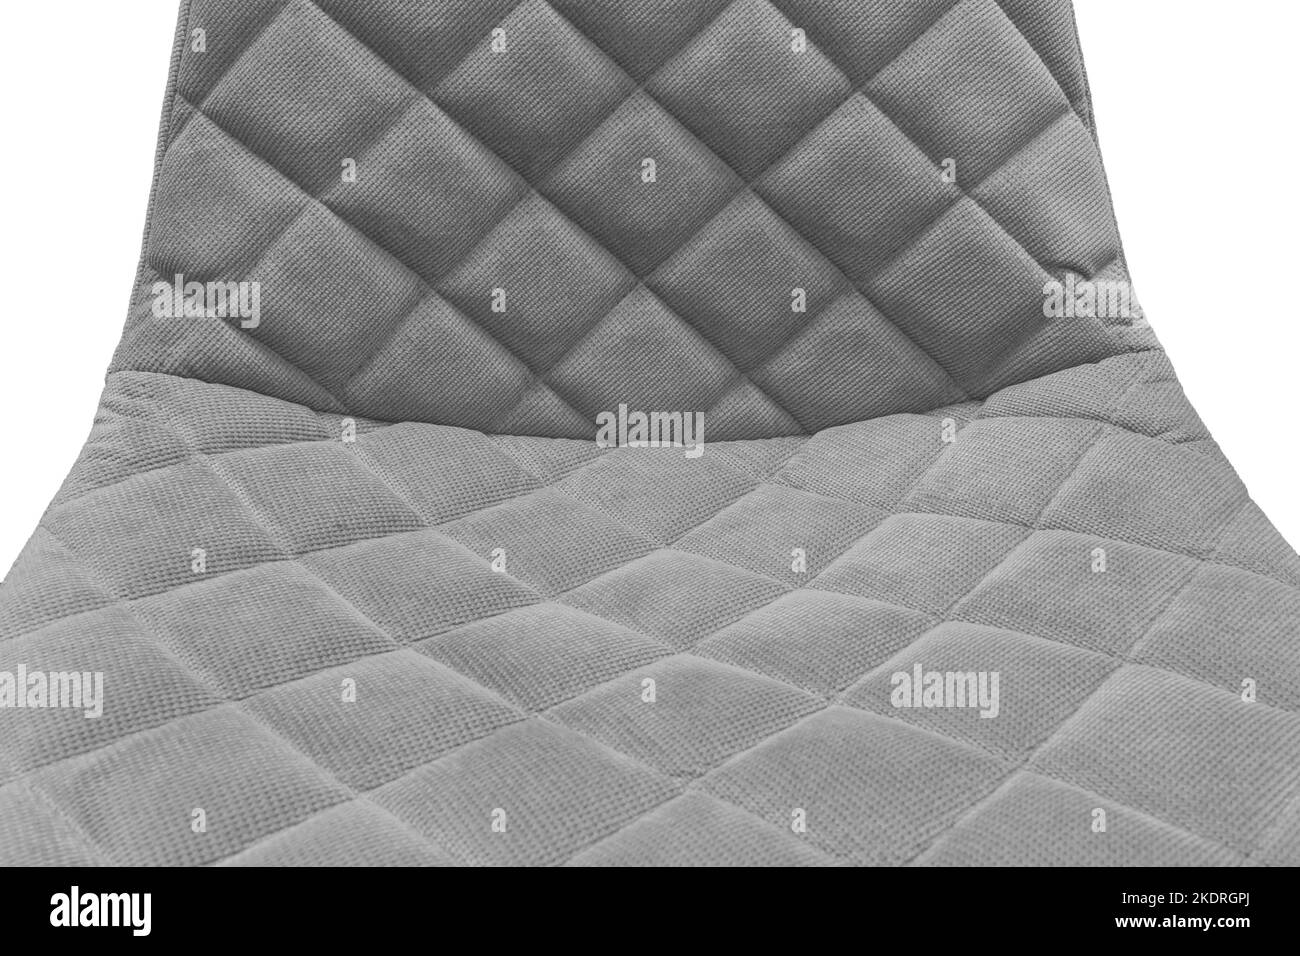 Fabric grey upholstery of interior chair design object decoration vintage on white background isolated. Stock Photo